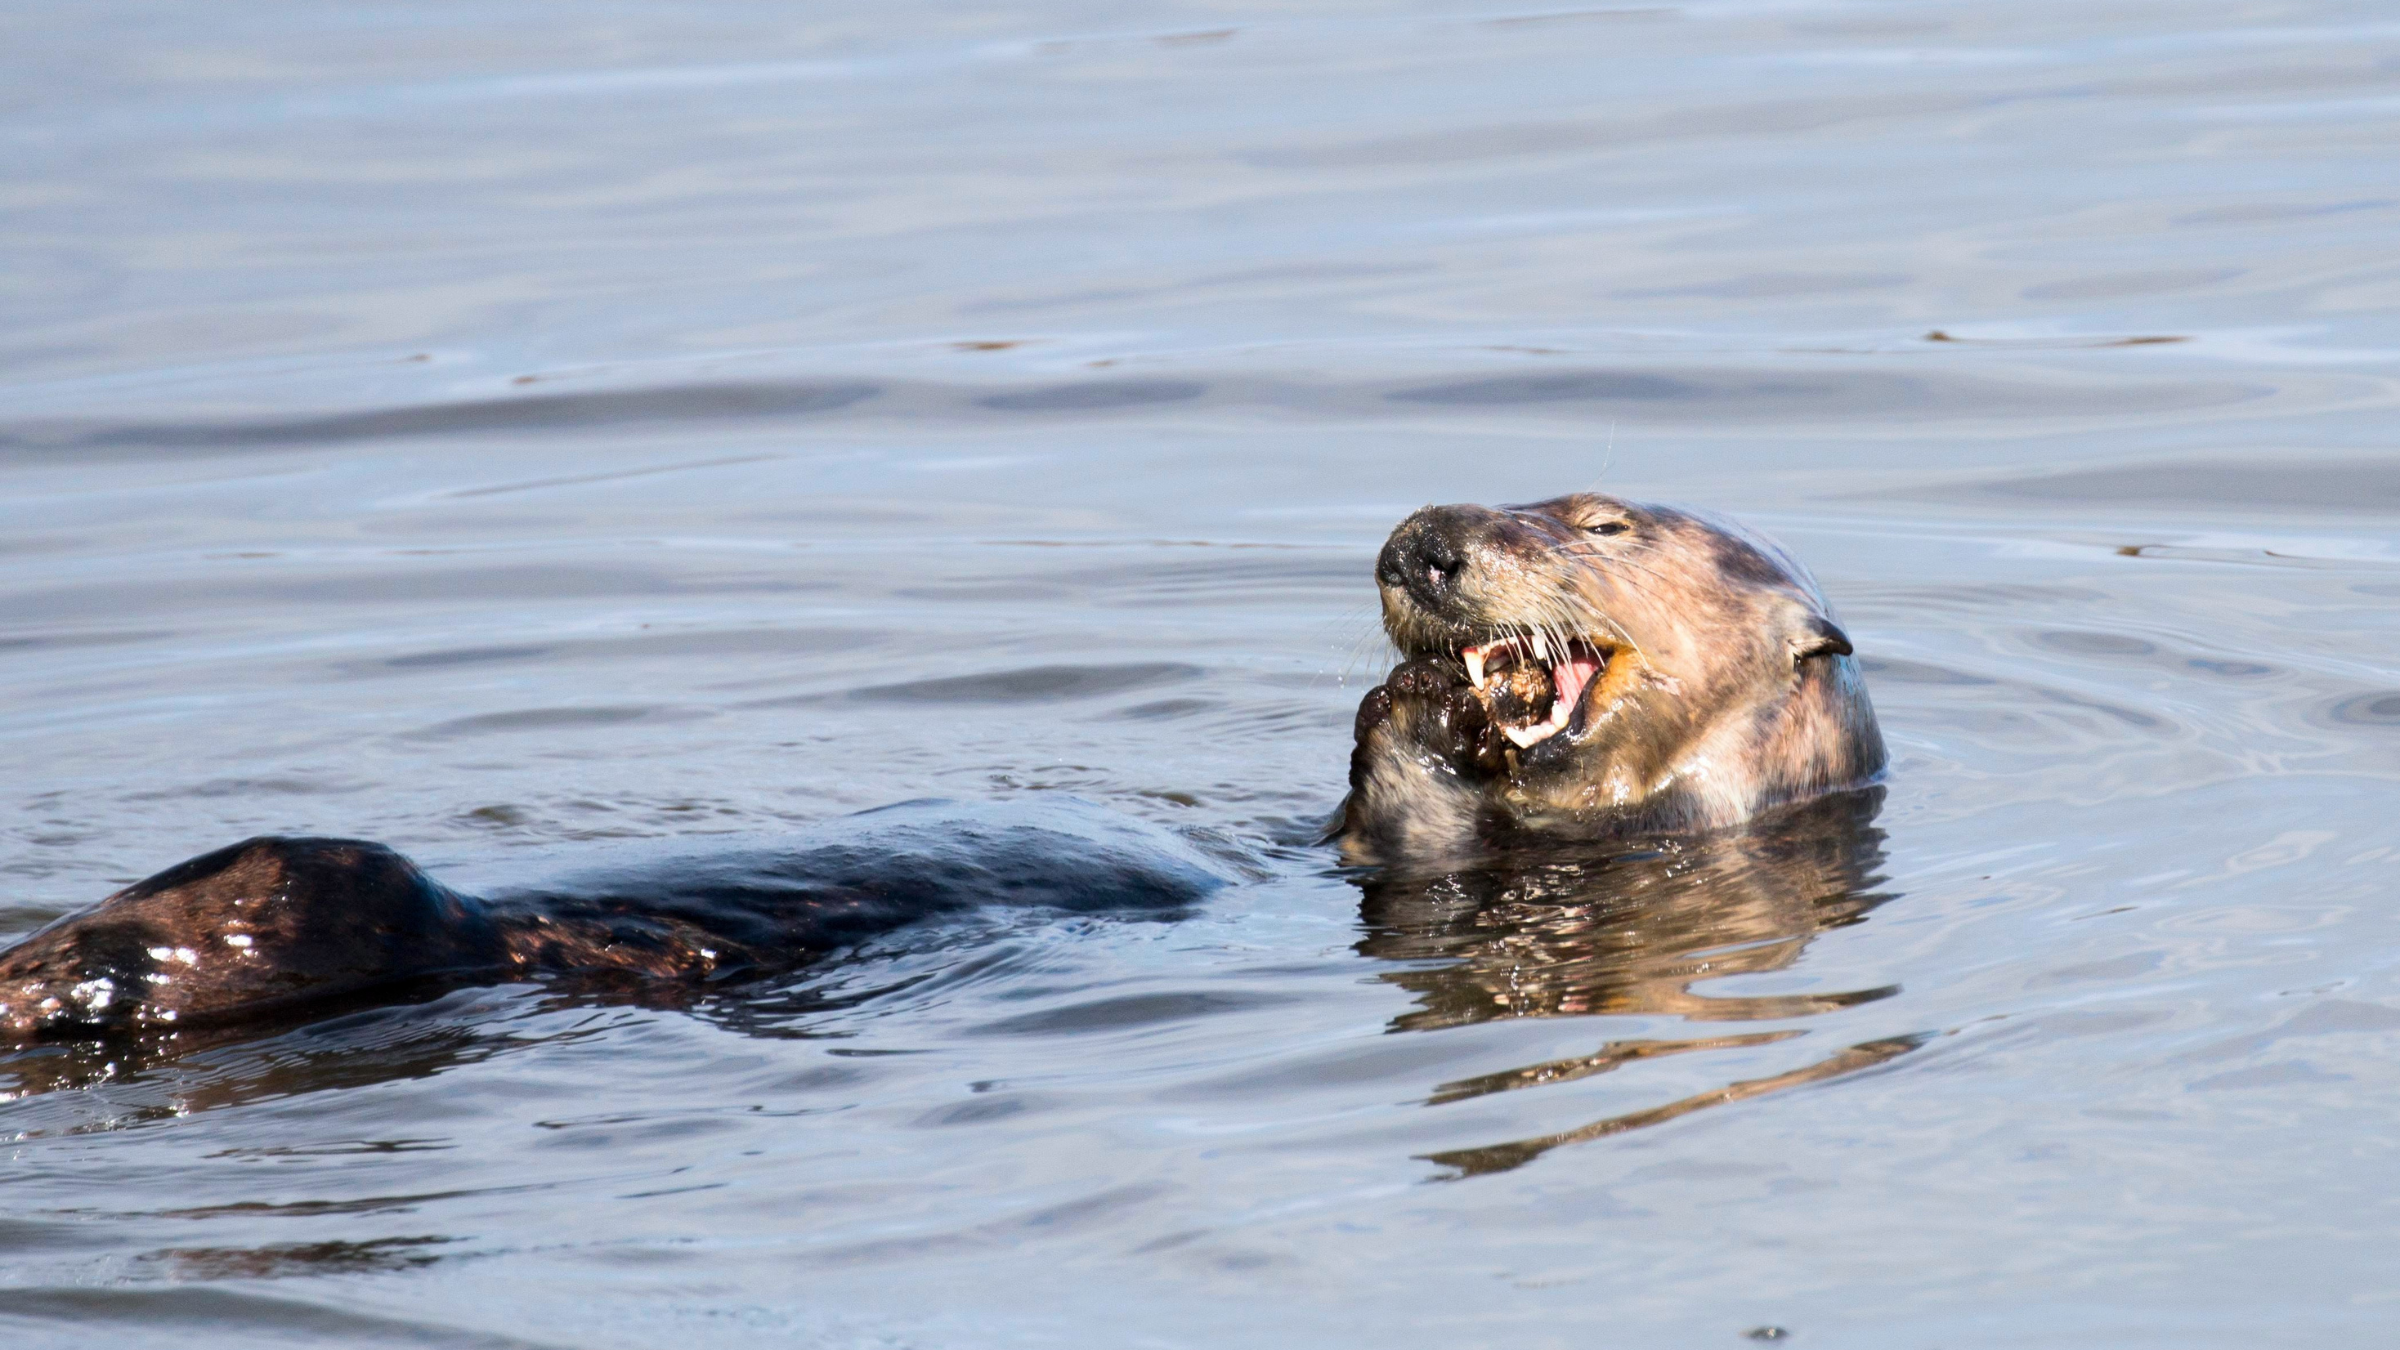 Adapting to Climate Change: The Creative Survival Strategies of Southern Sea Otters